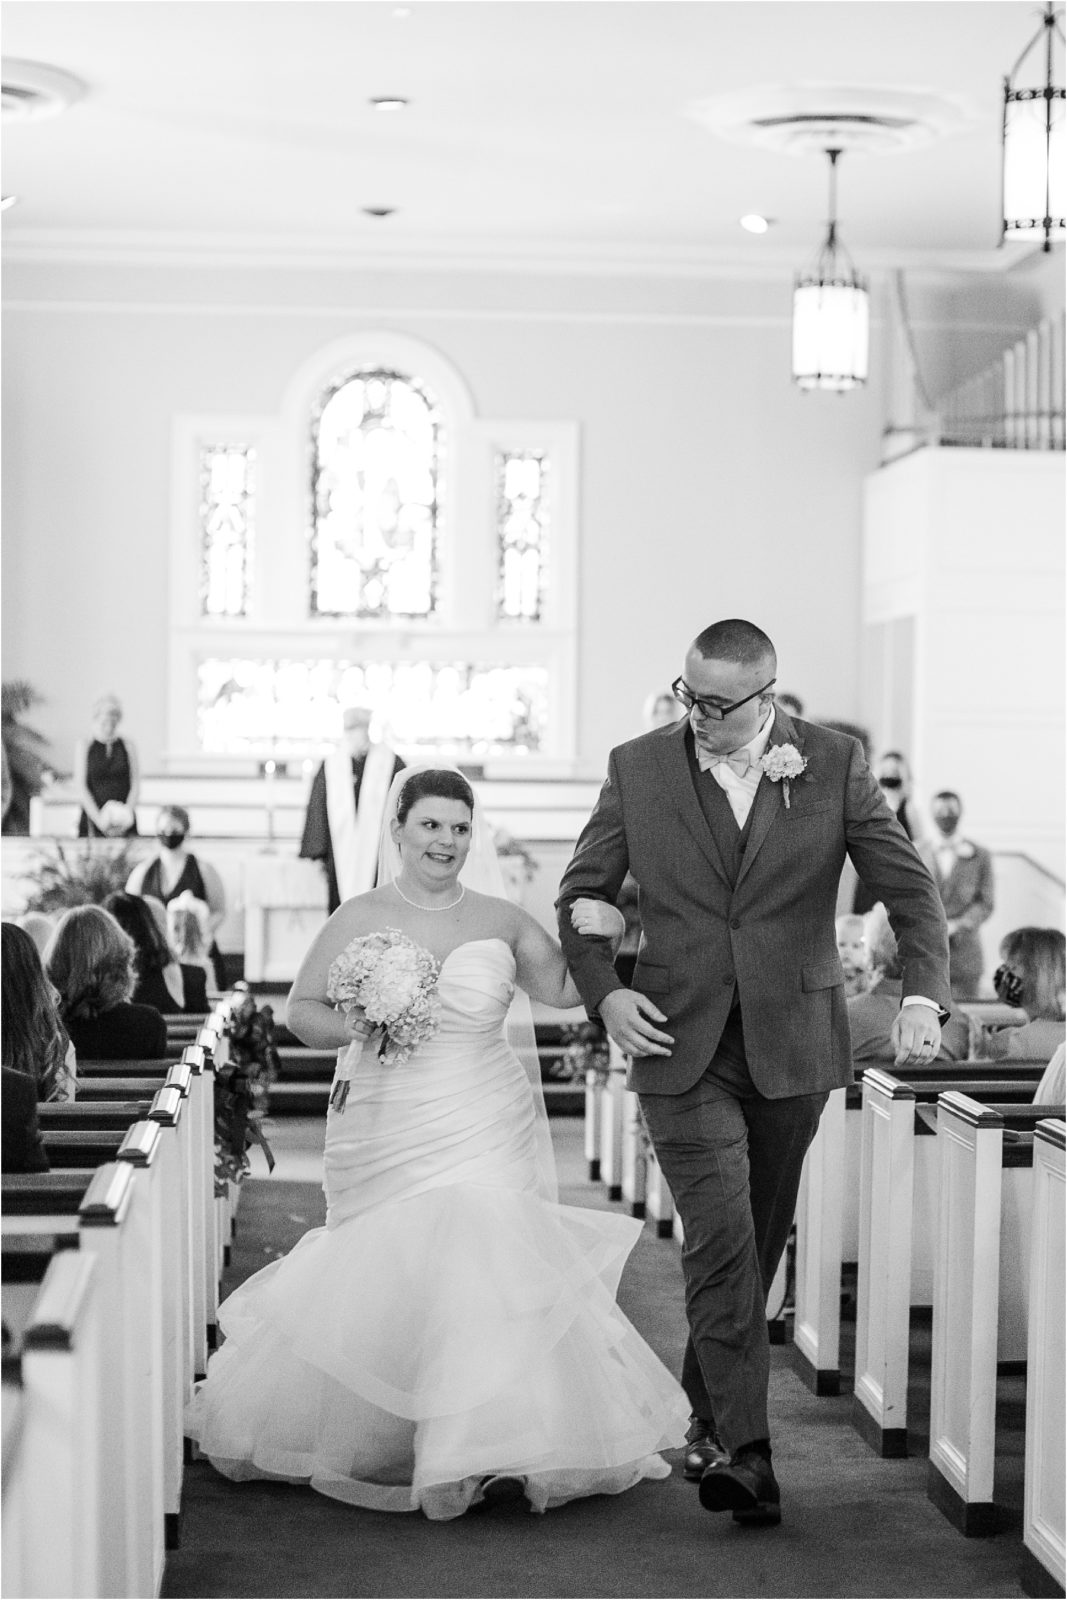 Couple walking back down church aisle after wedding ceremony